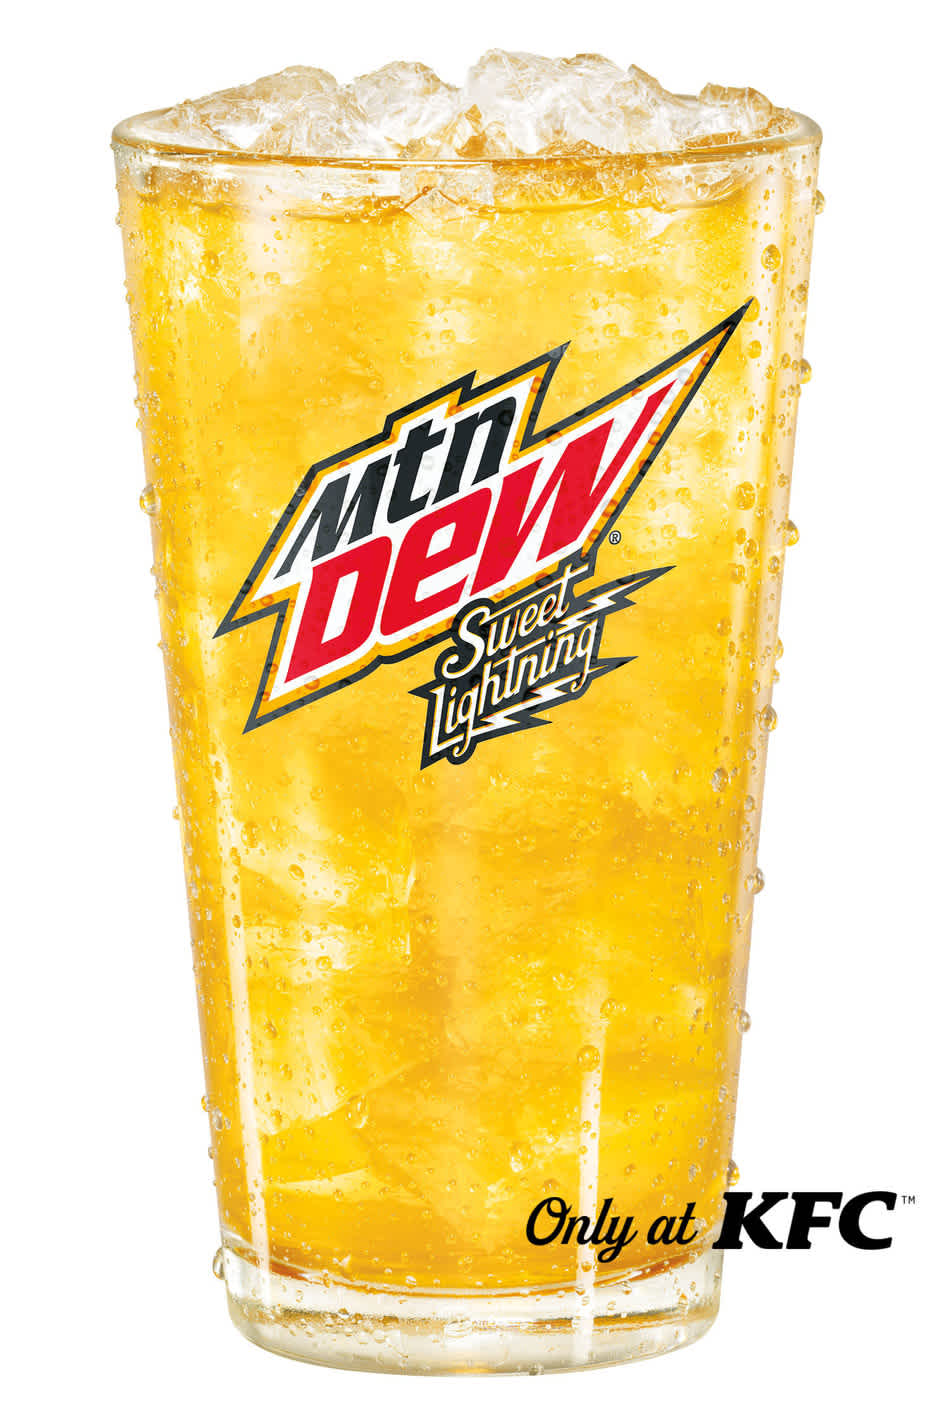 MTN DEW INTRODUCES SWEET LIGHTNING® AVAILABLE EXCLUSIVELY AT KFC U.S. - A BOLD NEW BEVERAGE TO PAIR PERFECTLY WITH THE COLONEL'S 11 HERBS AND SPICES